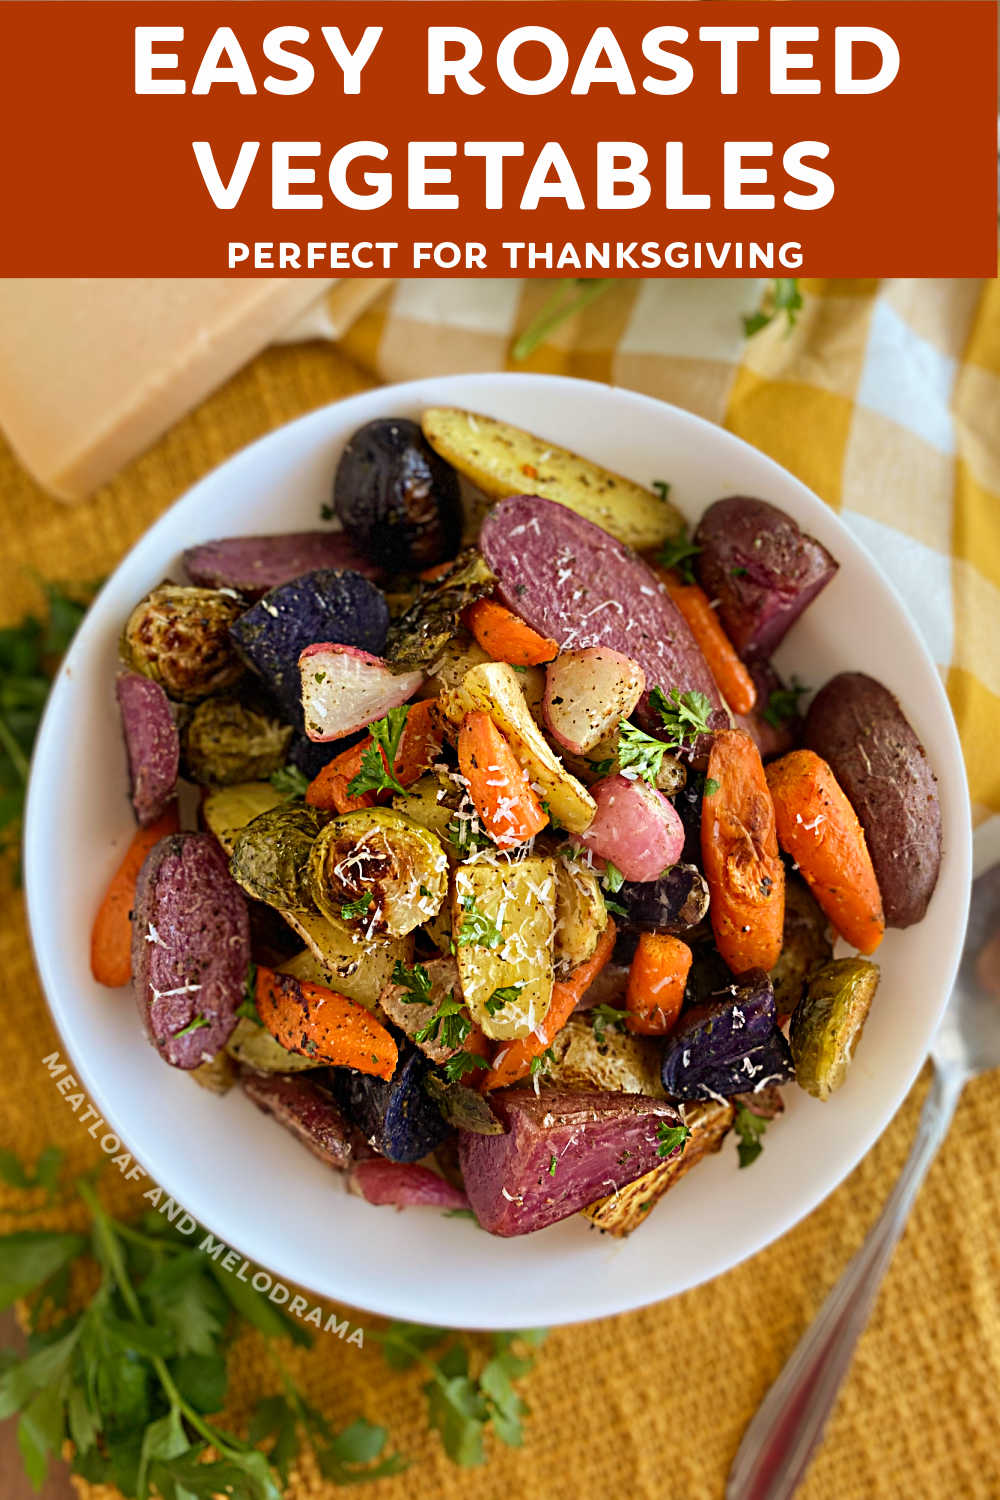 Easy Roasted Vegetables are the perfect side dish for Thanksgiving. Root vegetables are easy to prepare and take 30 minutes to bake. This healthy side dish is a delicious addition to your Thanksgiving table and simple enough for a weeknight meal. via @meamel